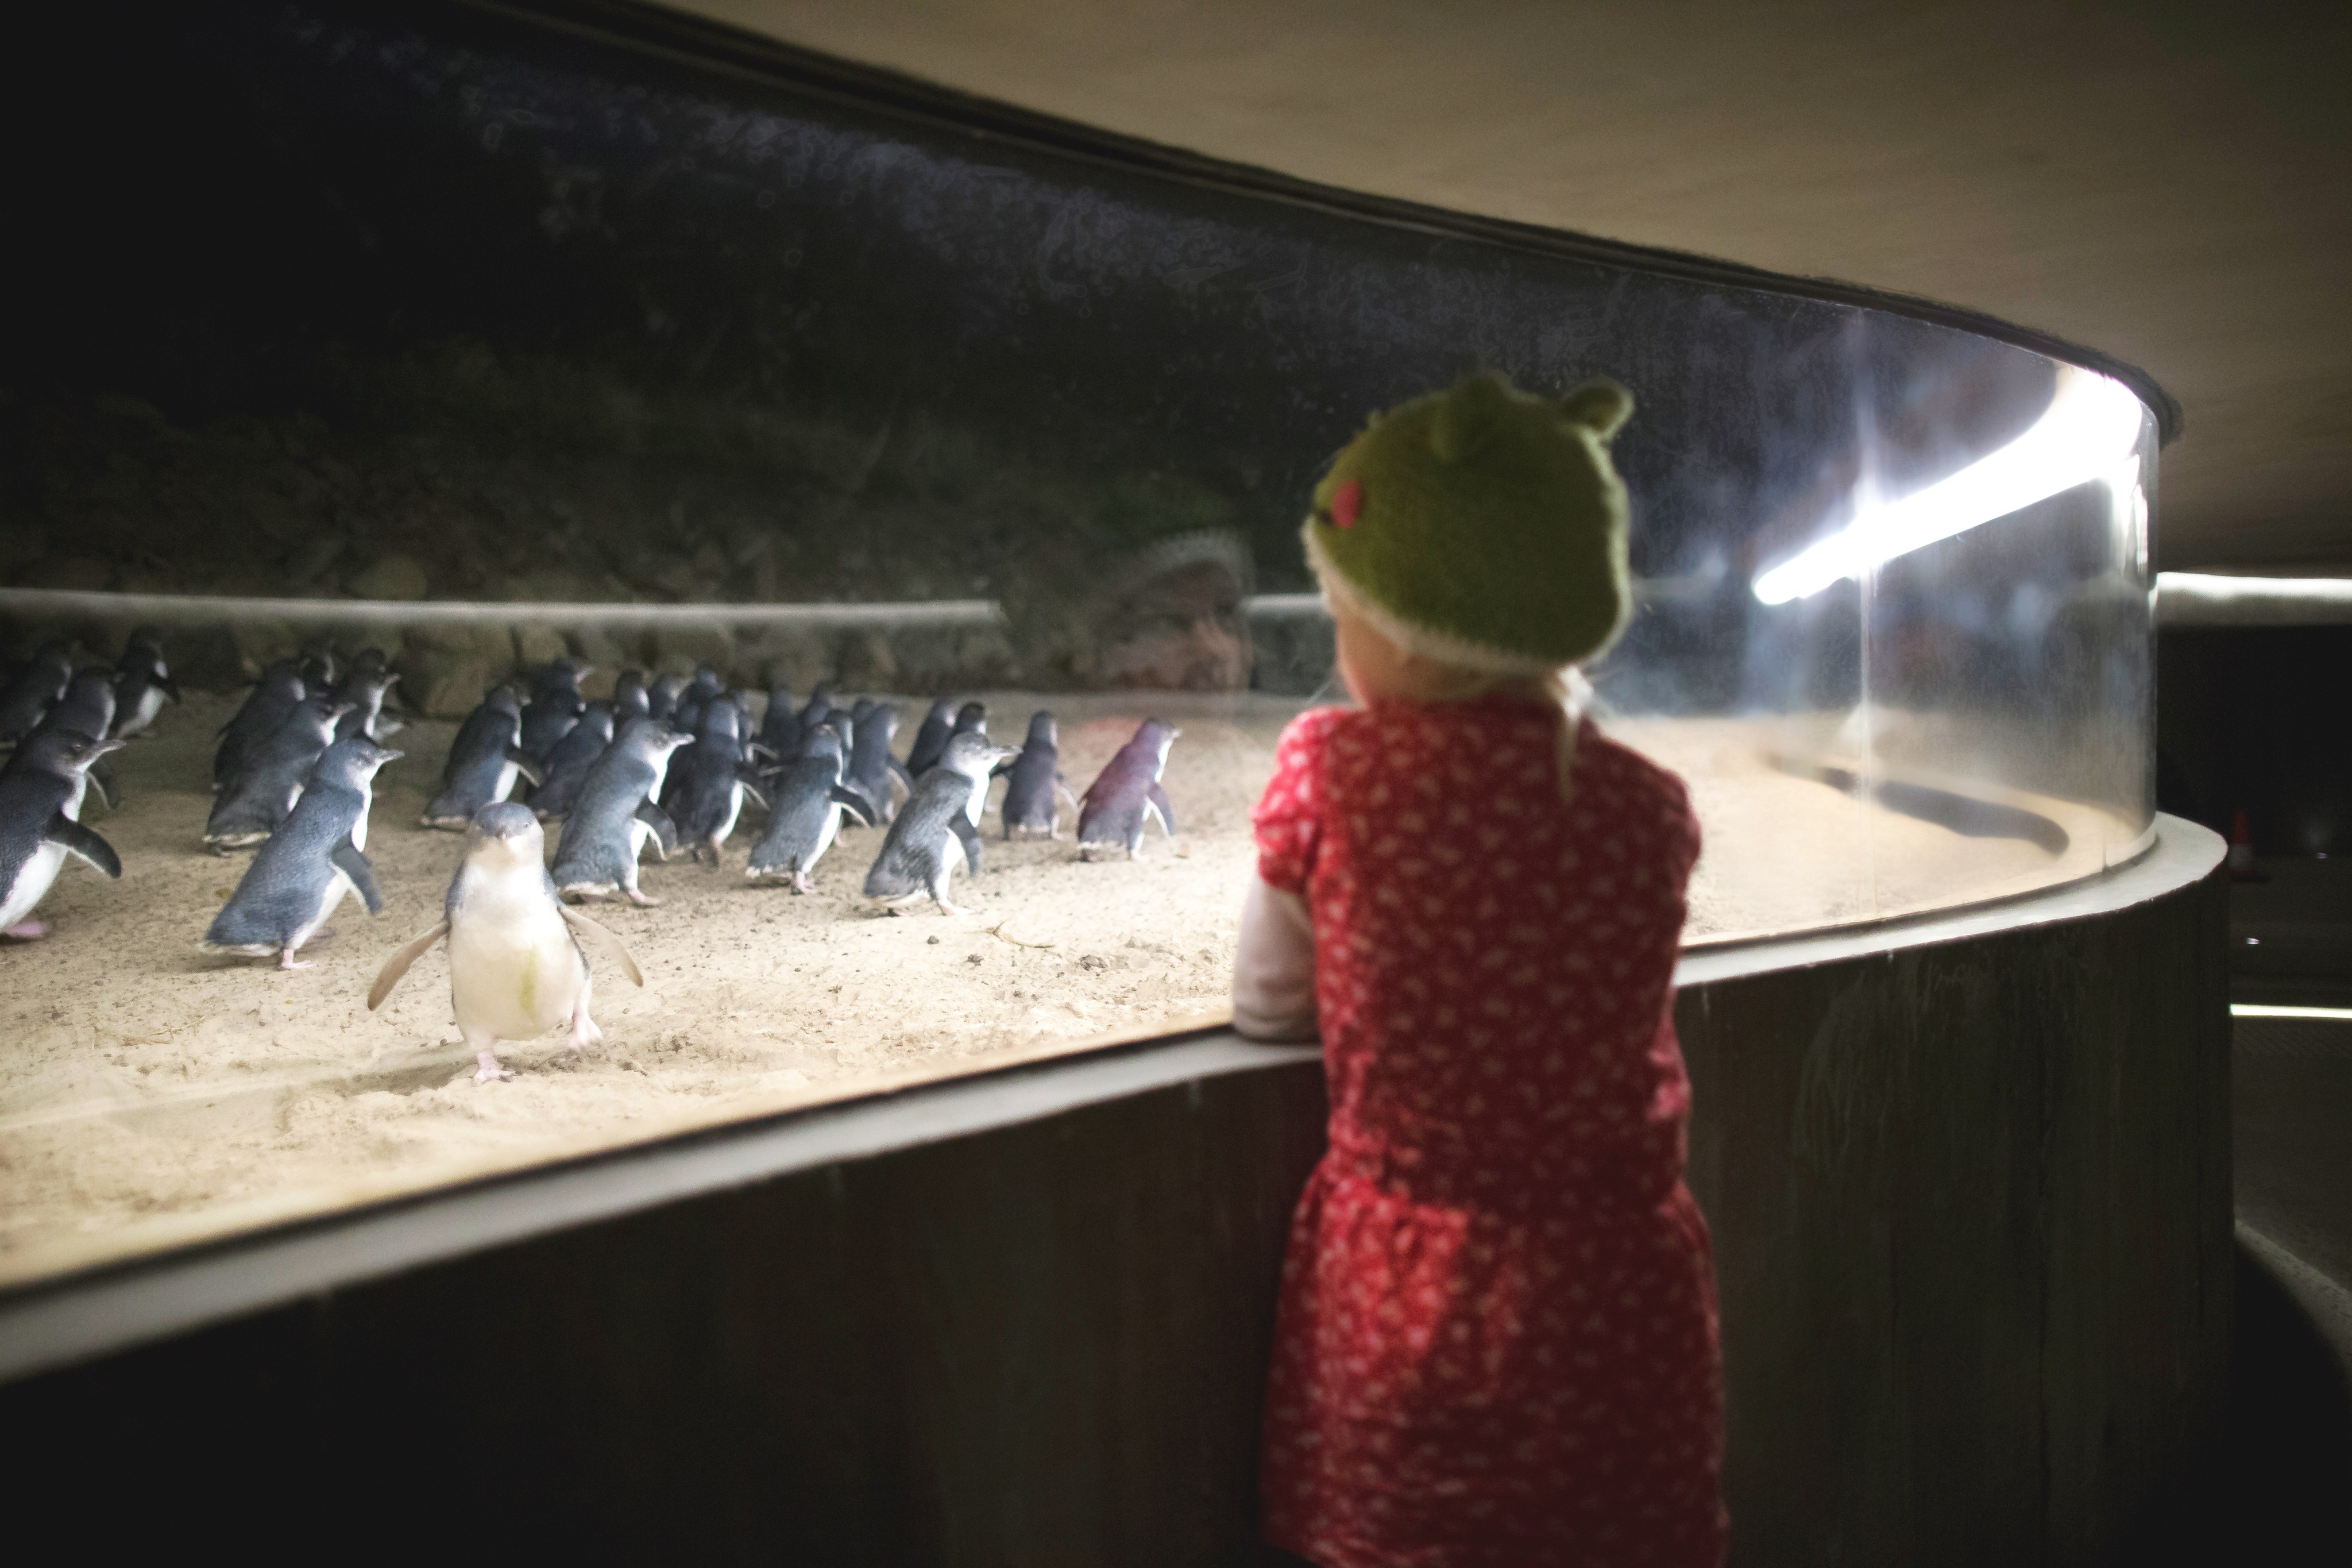 Falling populations of little penguins on Phillip Island, in Victoria, Australia, in the 1980s led to the creation of the Penguin Parade Visitor Centre, which allows visitors to view the birds up close without disrupting their daily lives. Photo: Phillip Island Nature Parks